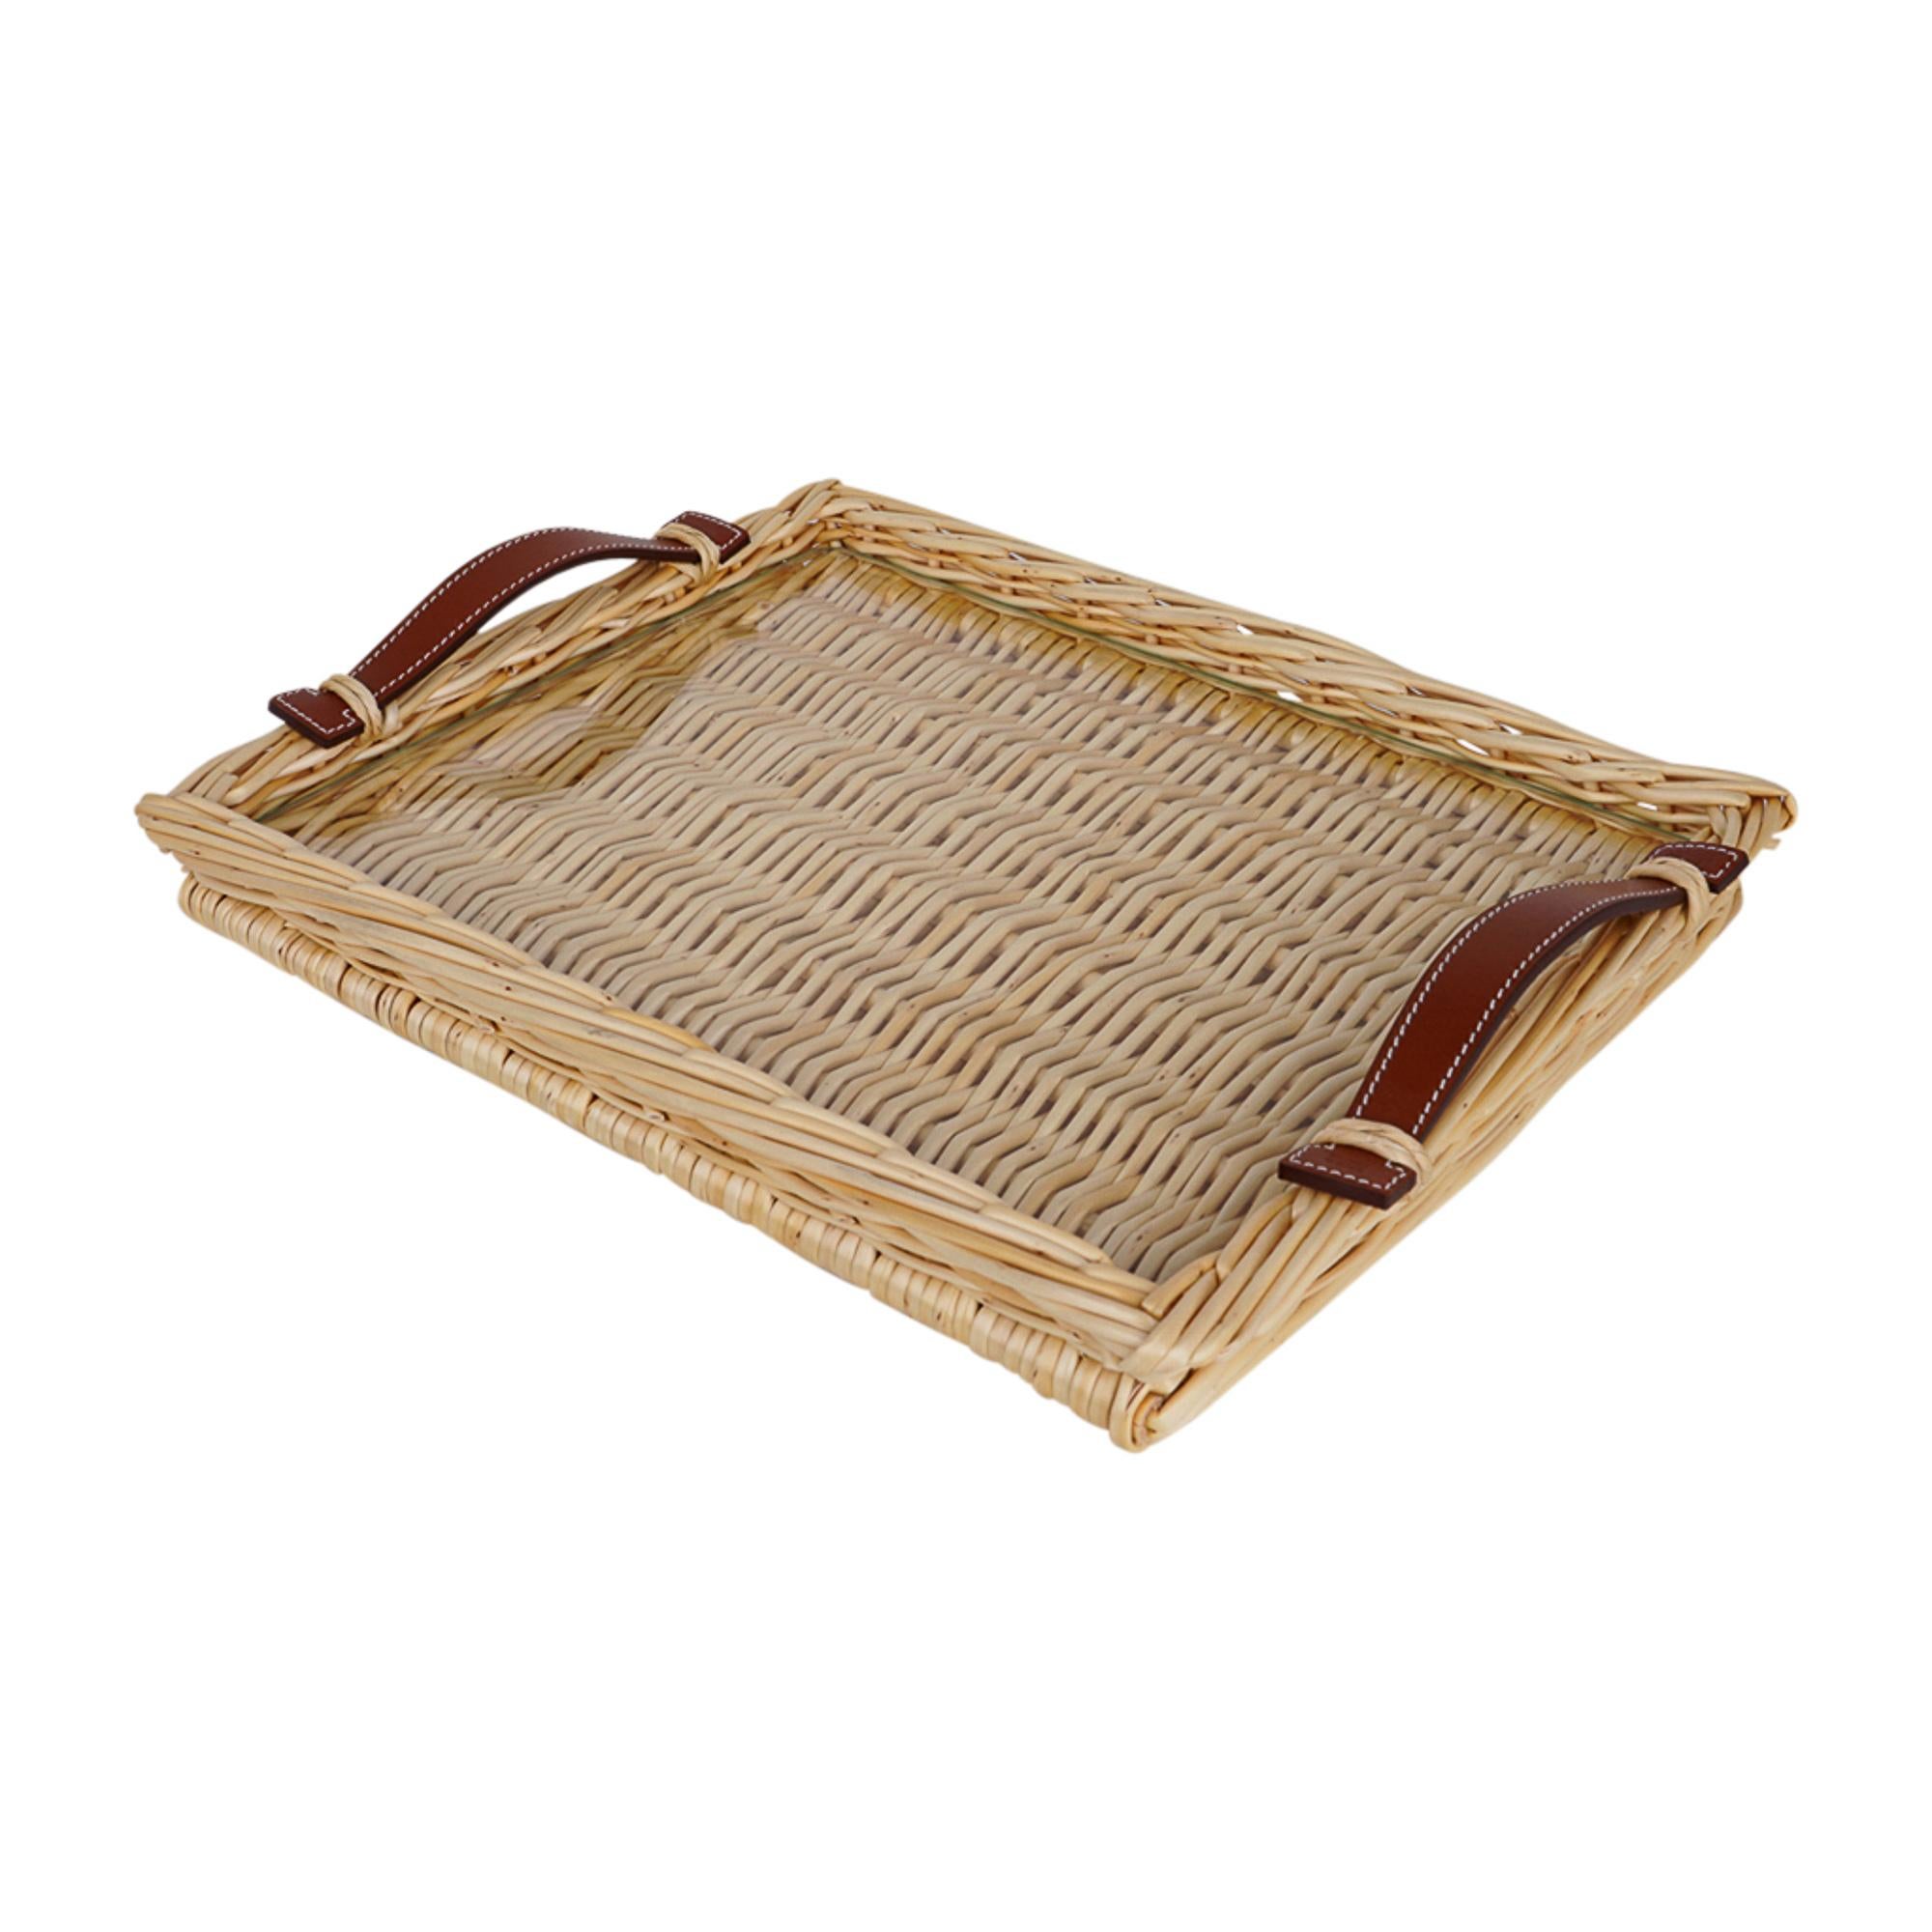 Mightychic offers an Hermes Oseraie Very, Very Small Model Rectangular serving tray with coveted Bridle leather handles.
Fitted glass interior.
Leather has signature Hermes stamp.
Timeless piece also makes for a special gift idea!
Comes with